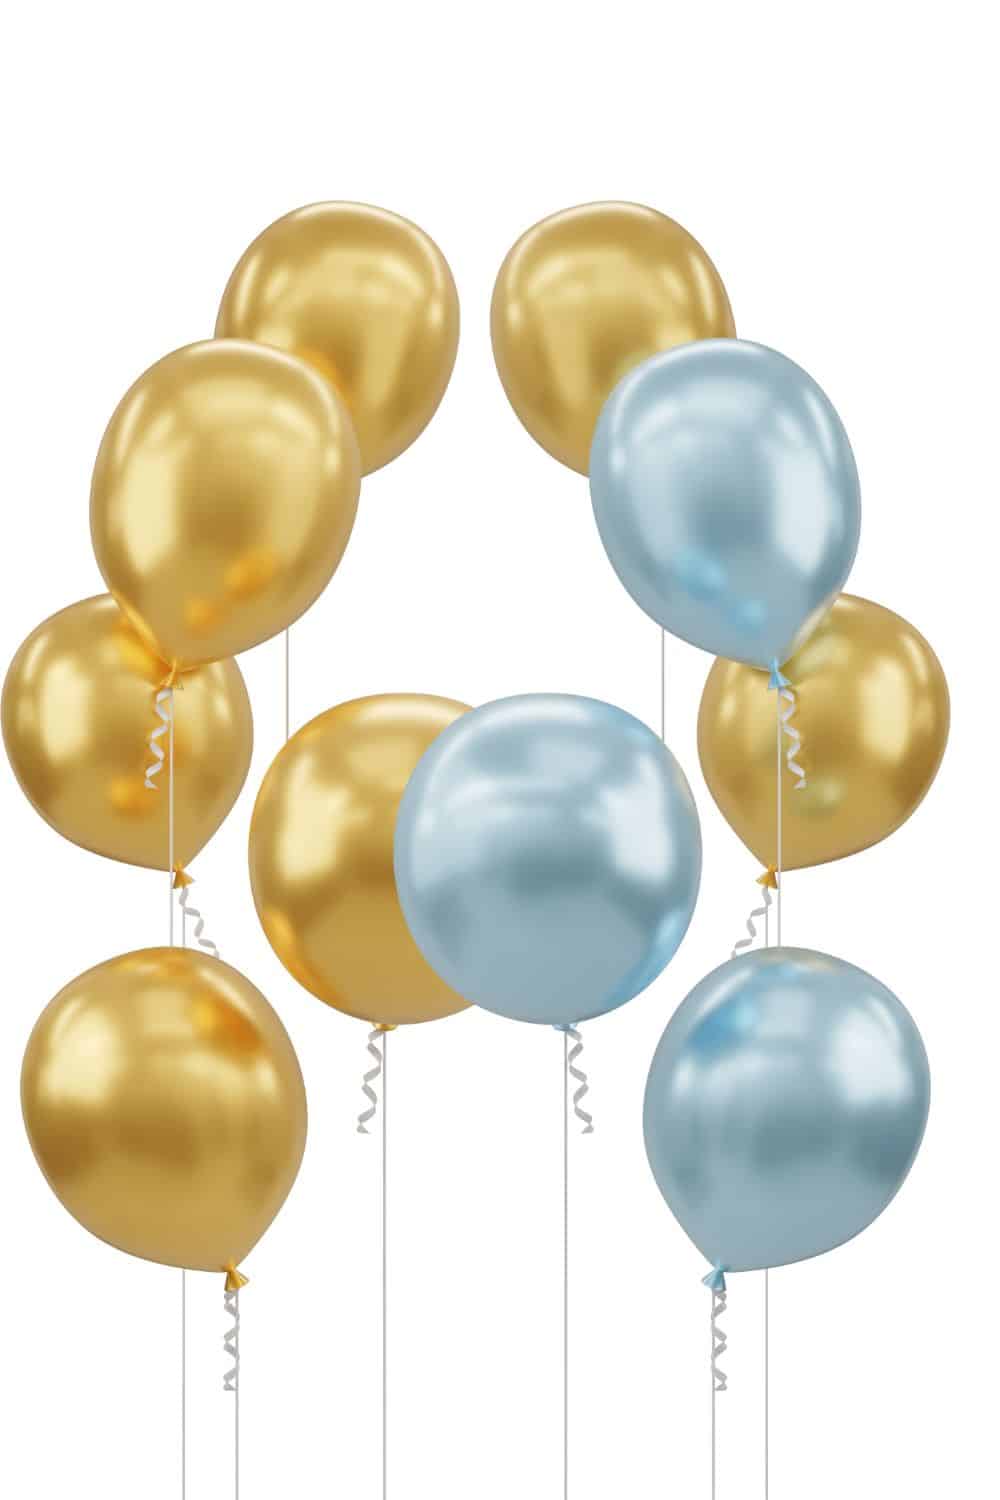 5 Party Core Essentials That Make Parties Amazing and Fun - party balloons 